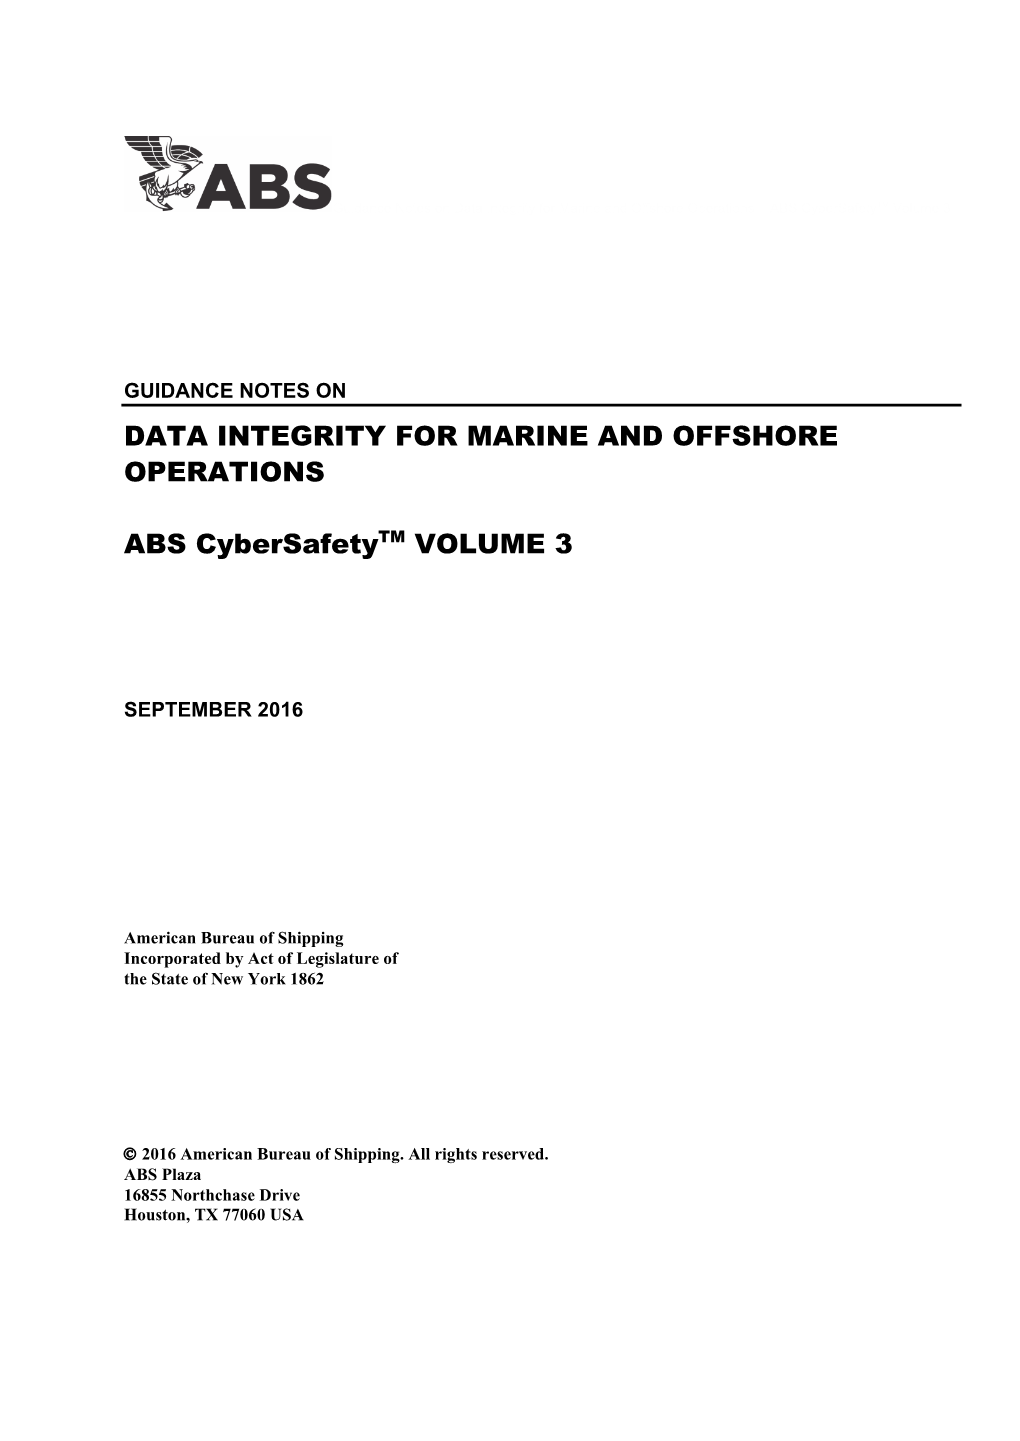 Guidance Notes on Data Integrity for Marine and Offshore Operations – ABS Cybersafetytm Volume 3